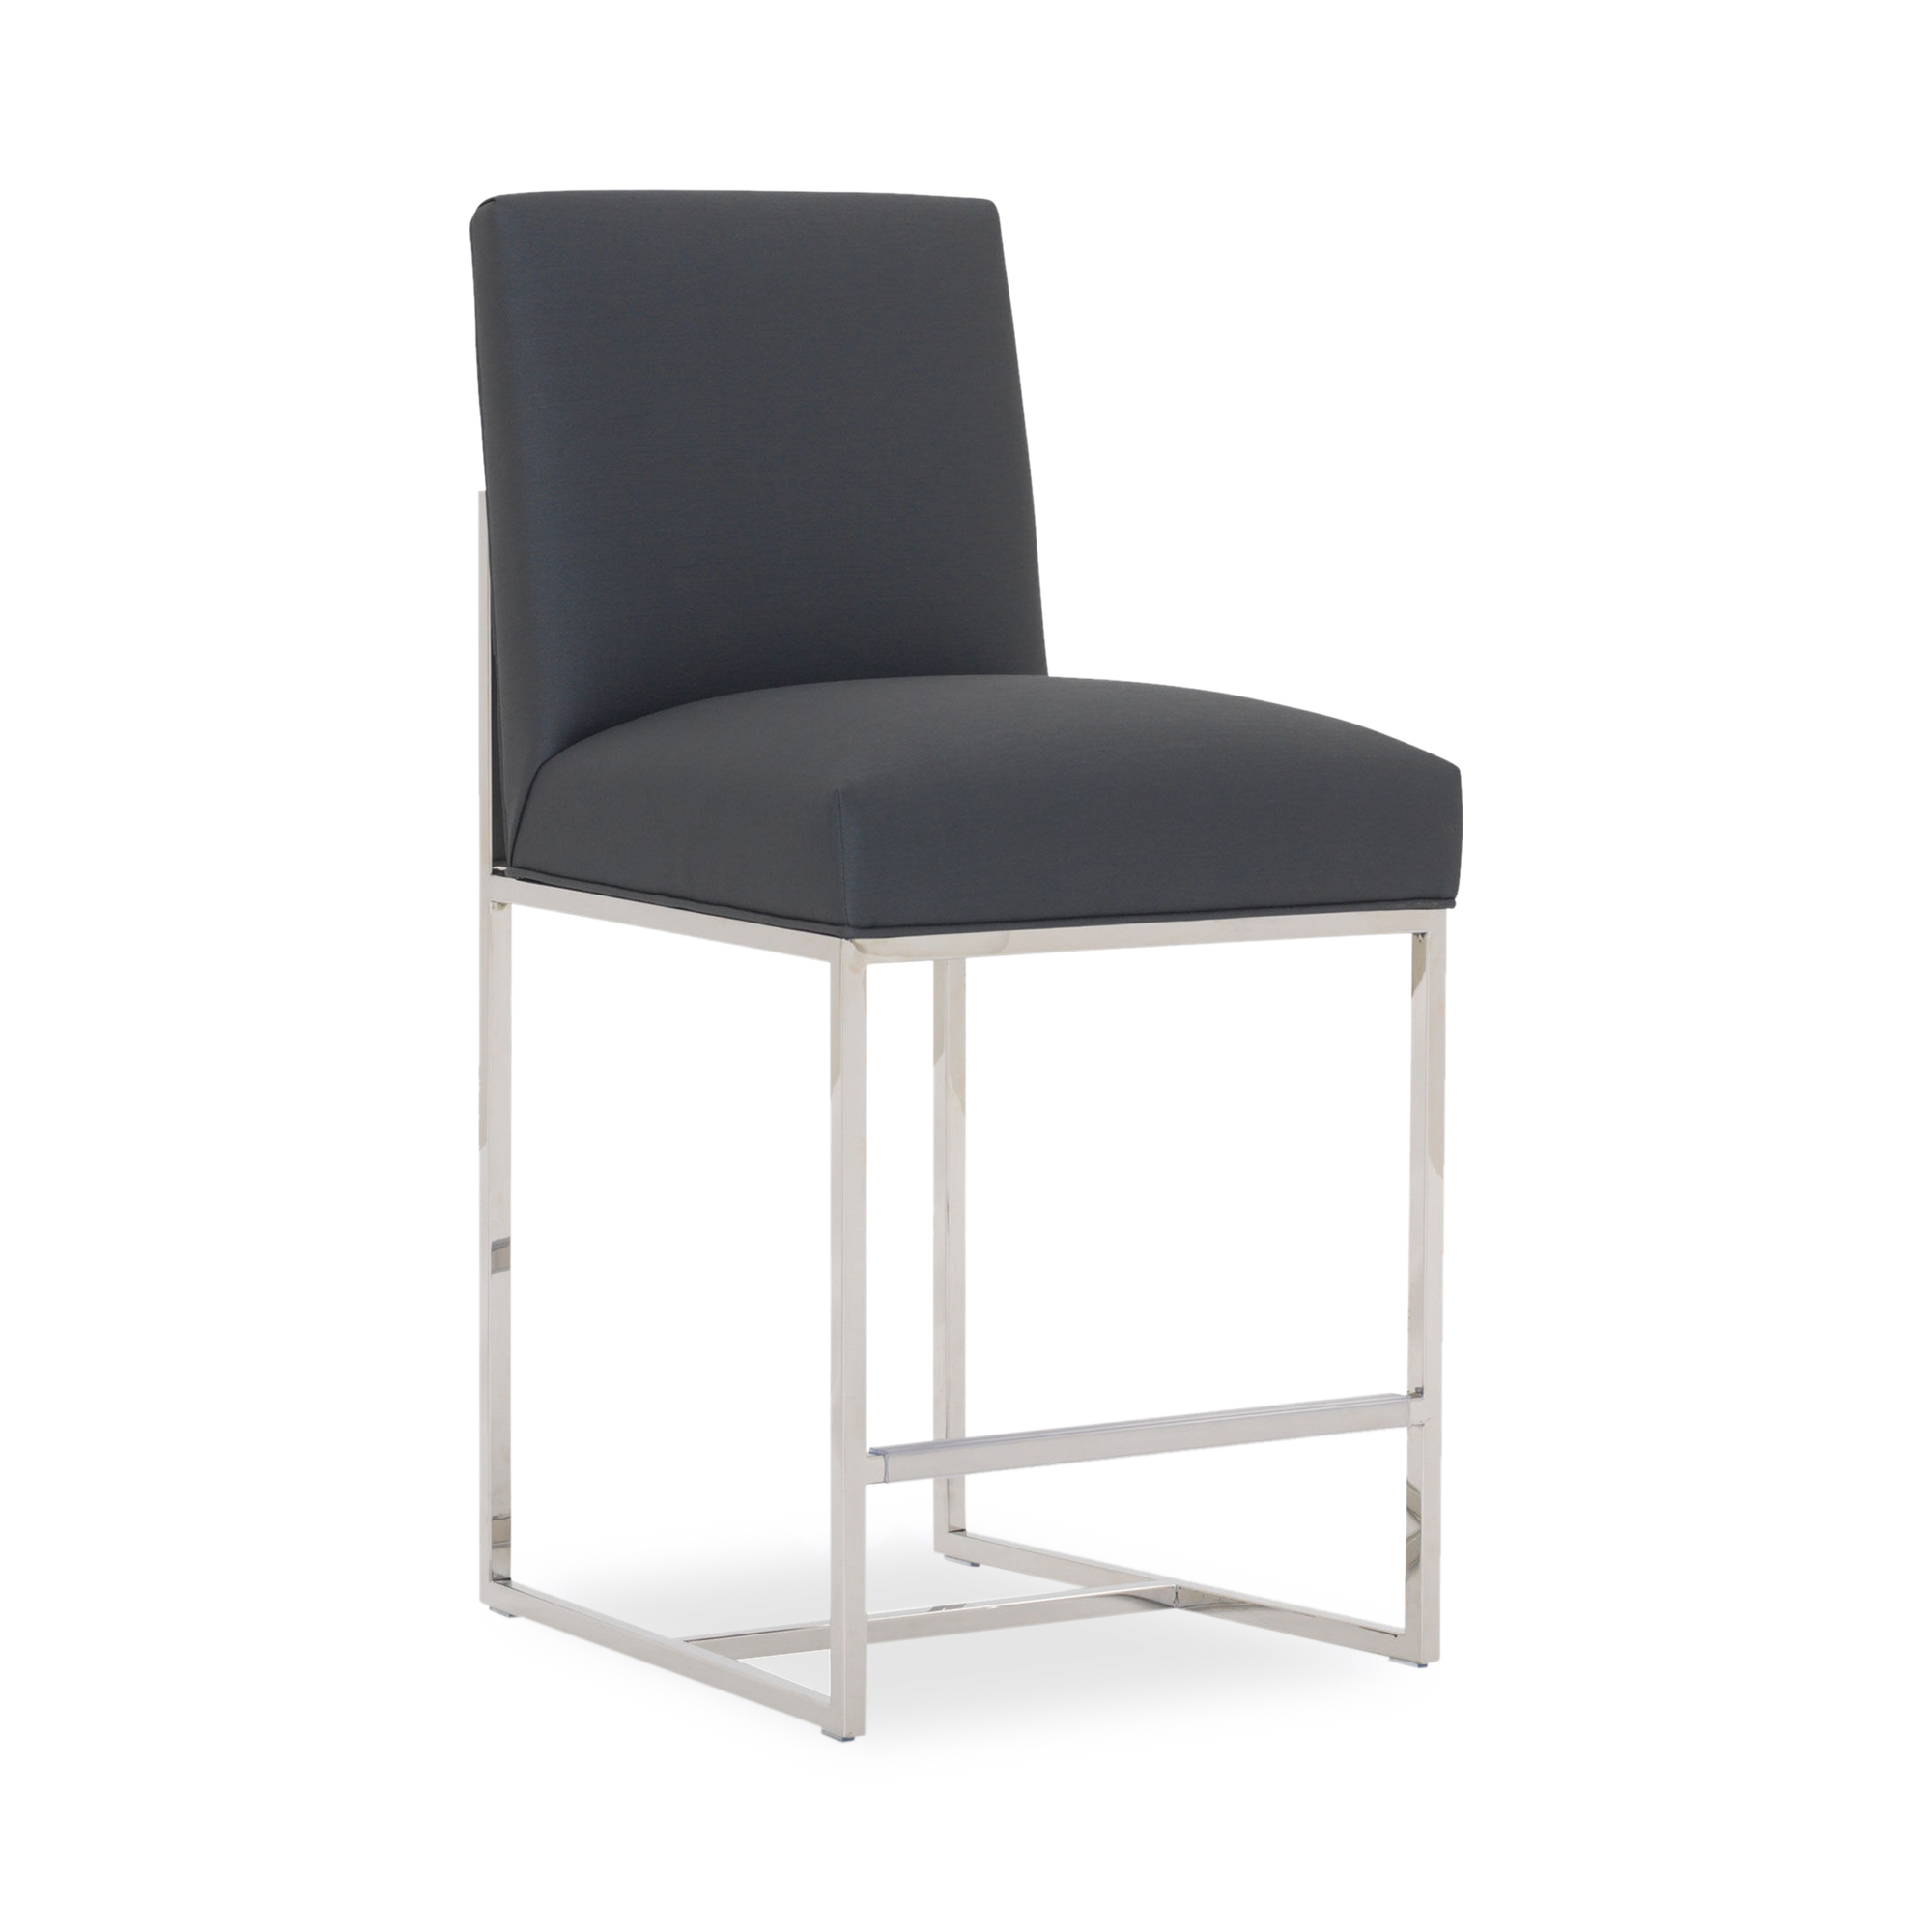 Offering a clean-lined, architectural design, the Gage Bar Stool offers a luxe contemporary comfort.